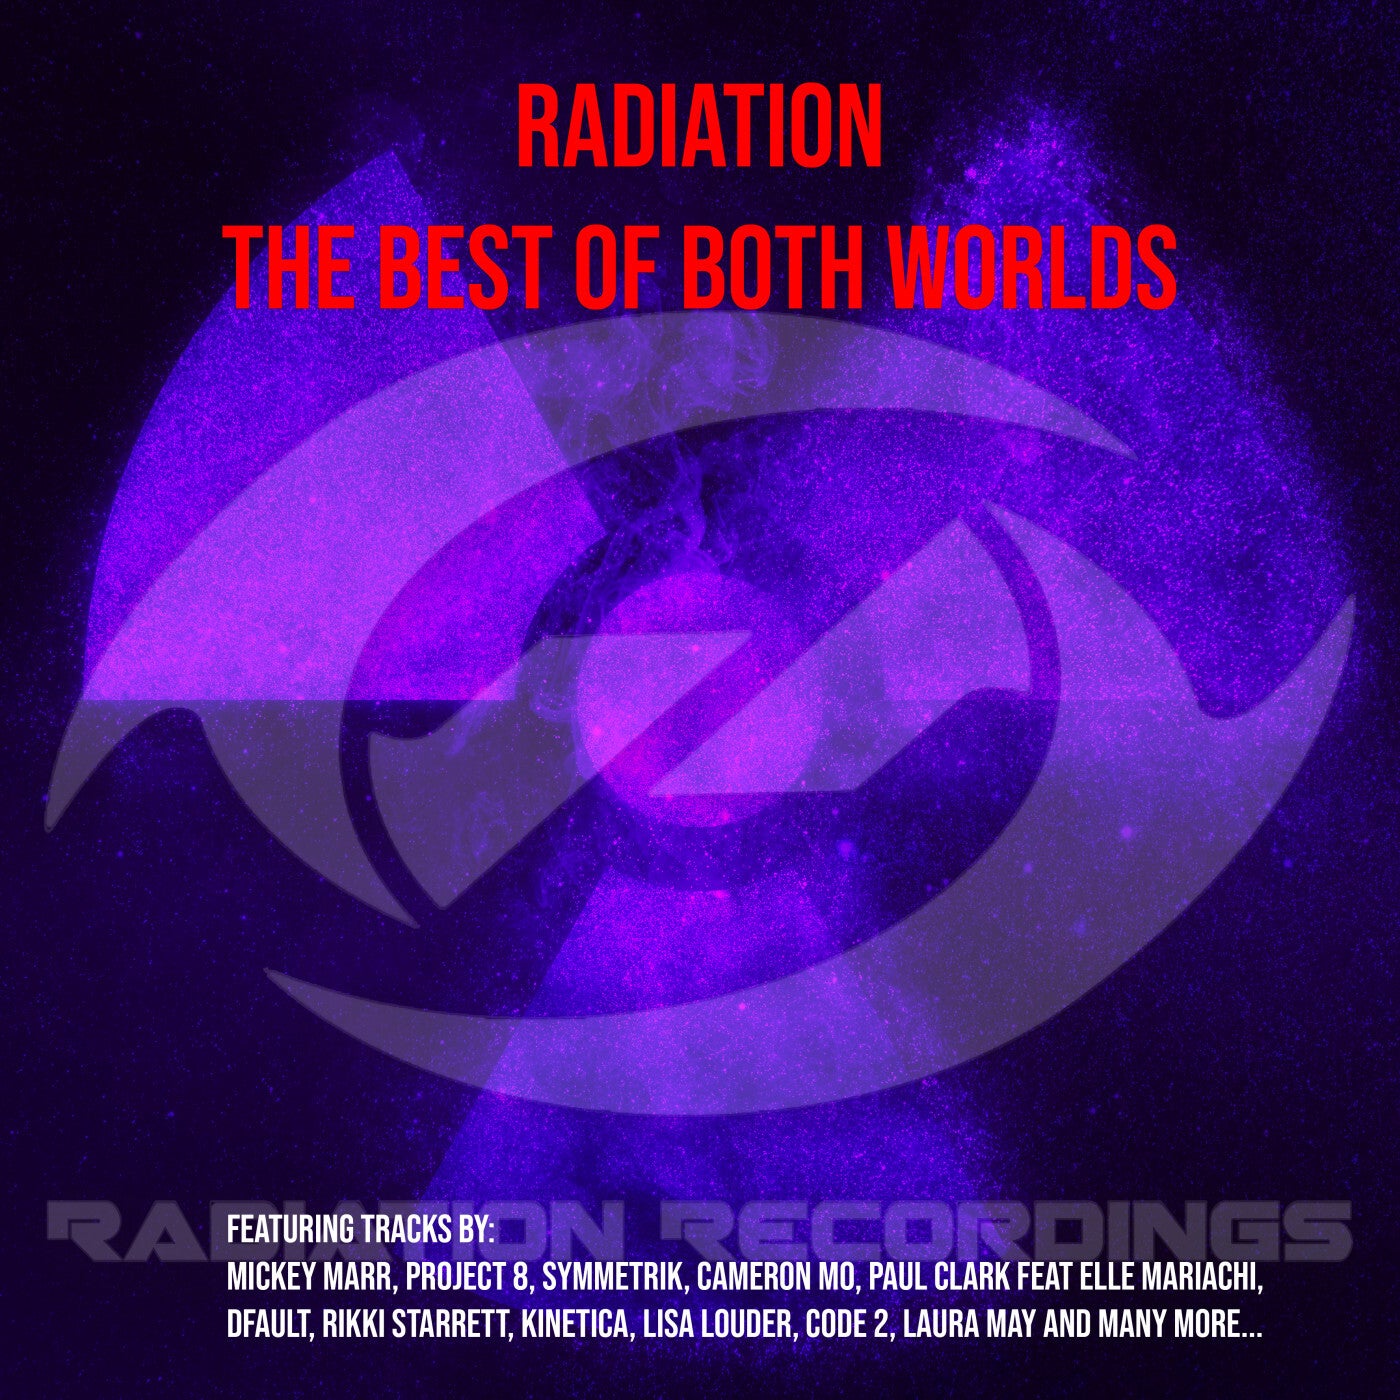 Radiation - The Best of Both Worlds